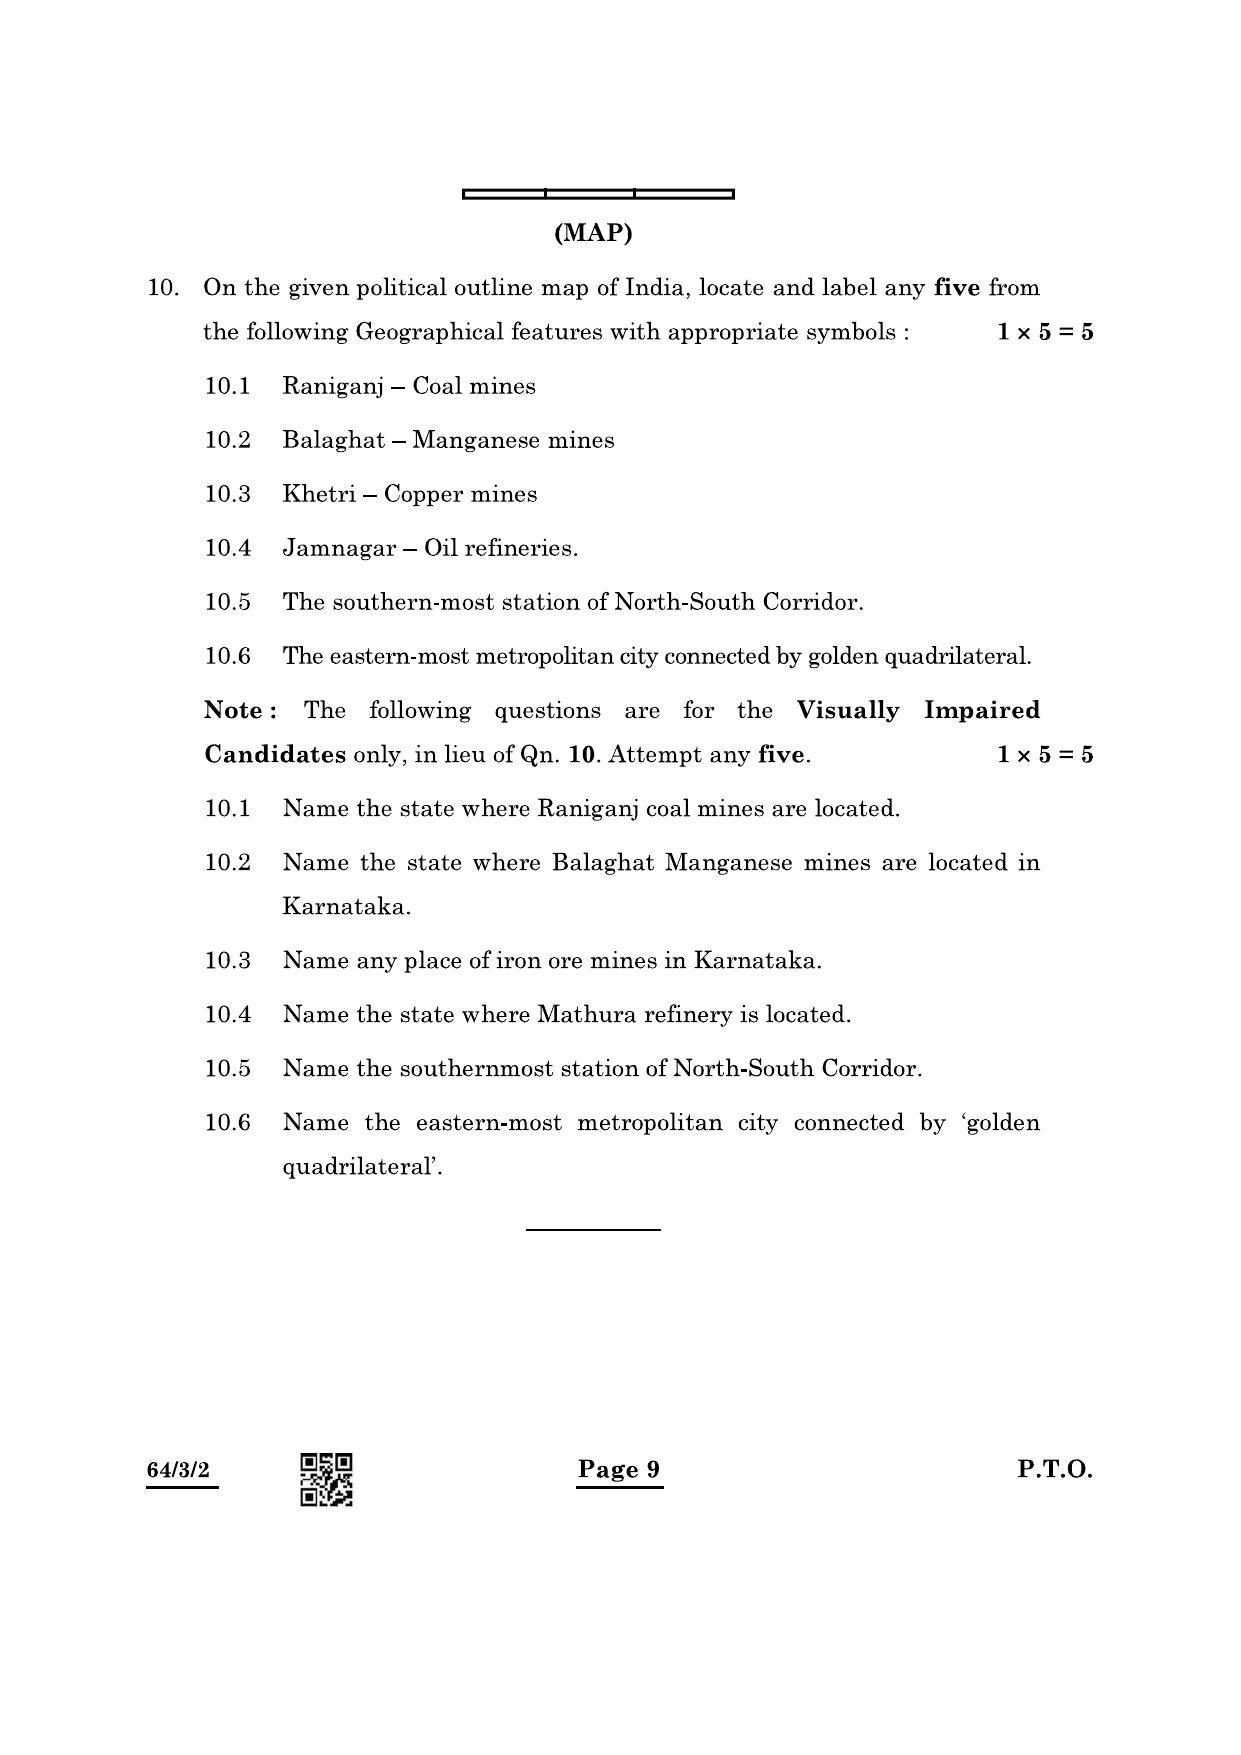 CBSE Class 12 64-3-2 Geography 2022 Question Paper - Page 9